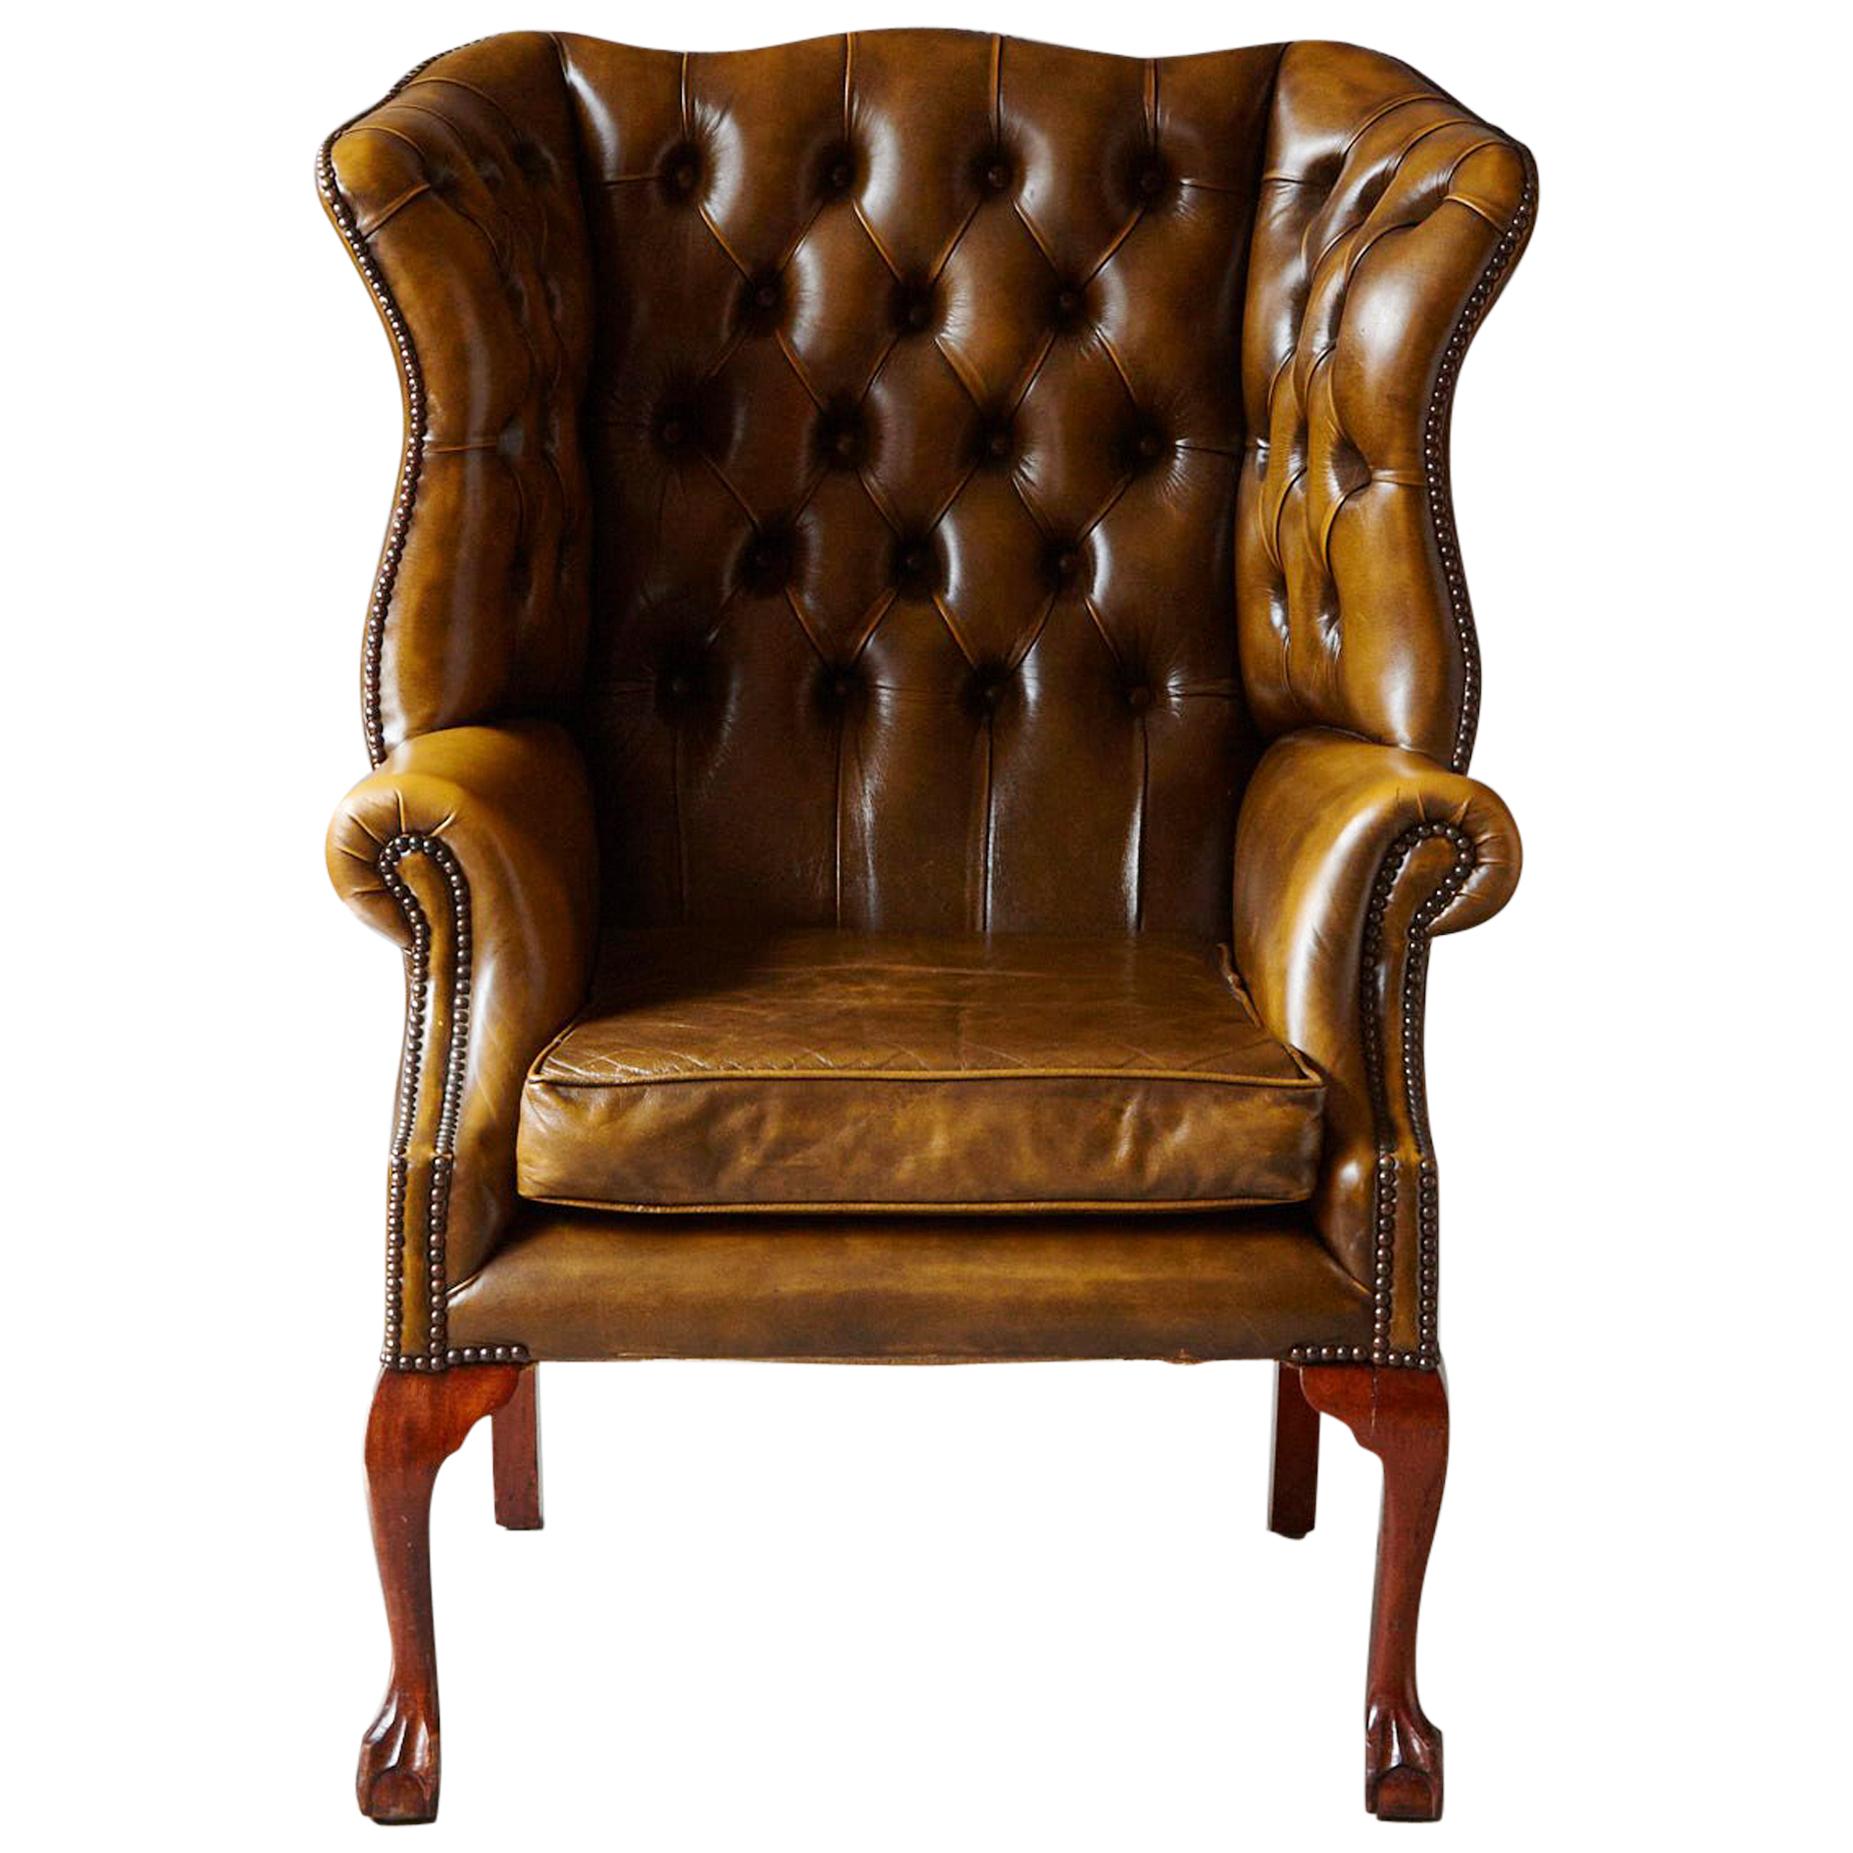 Buckingham Walnut Burnished Leather Wingback Chair by Hancock & Moore